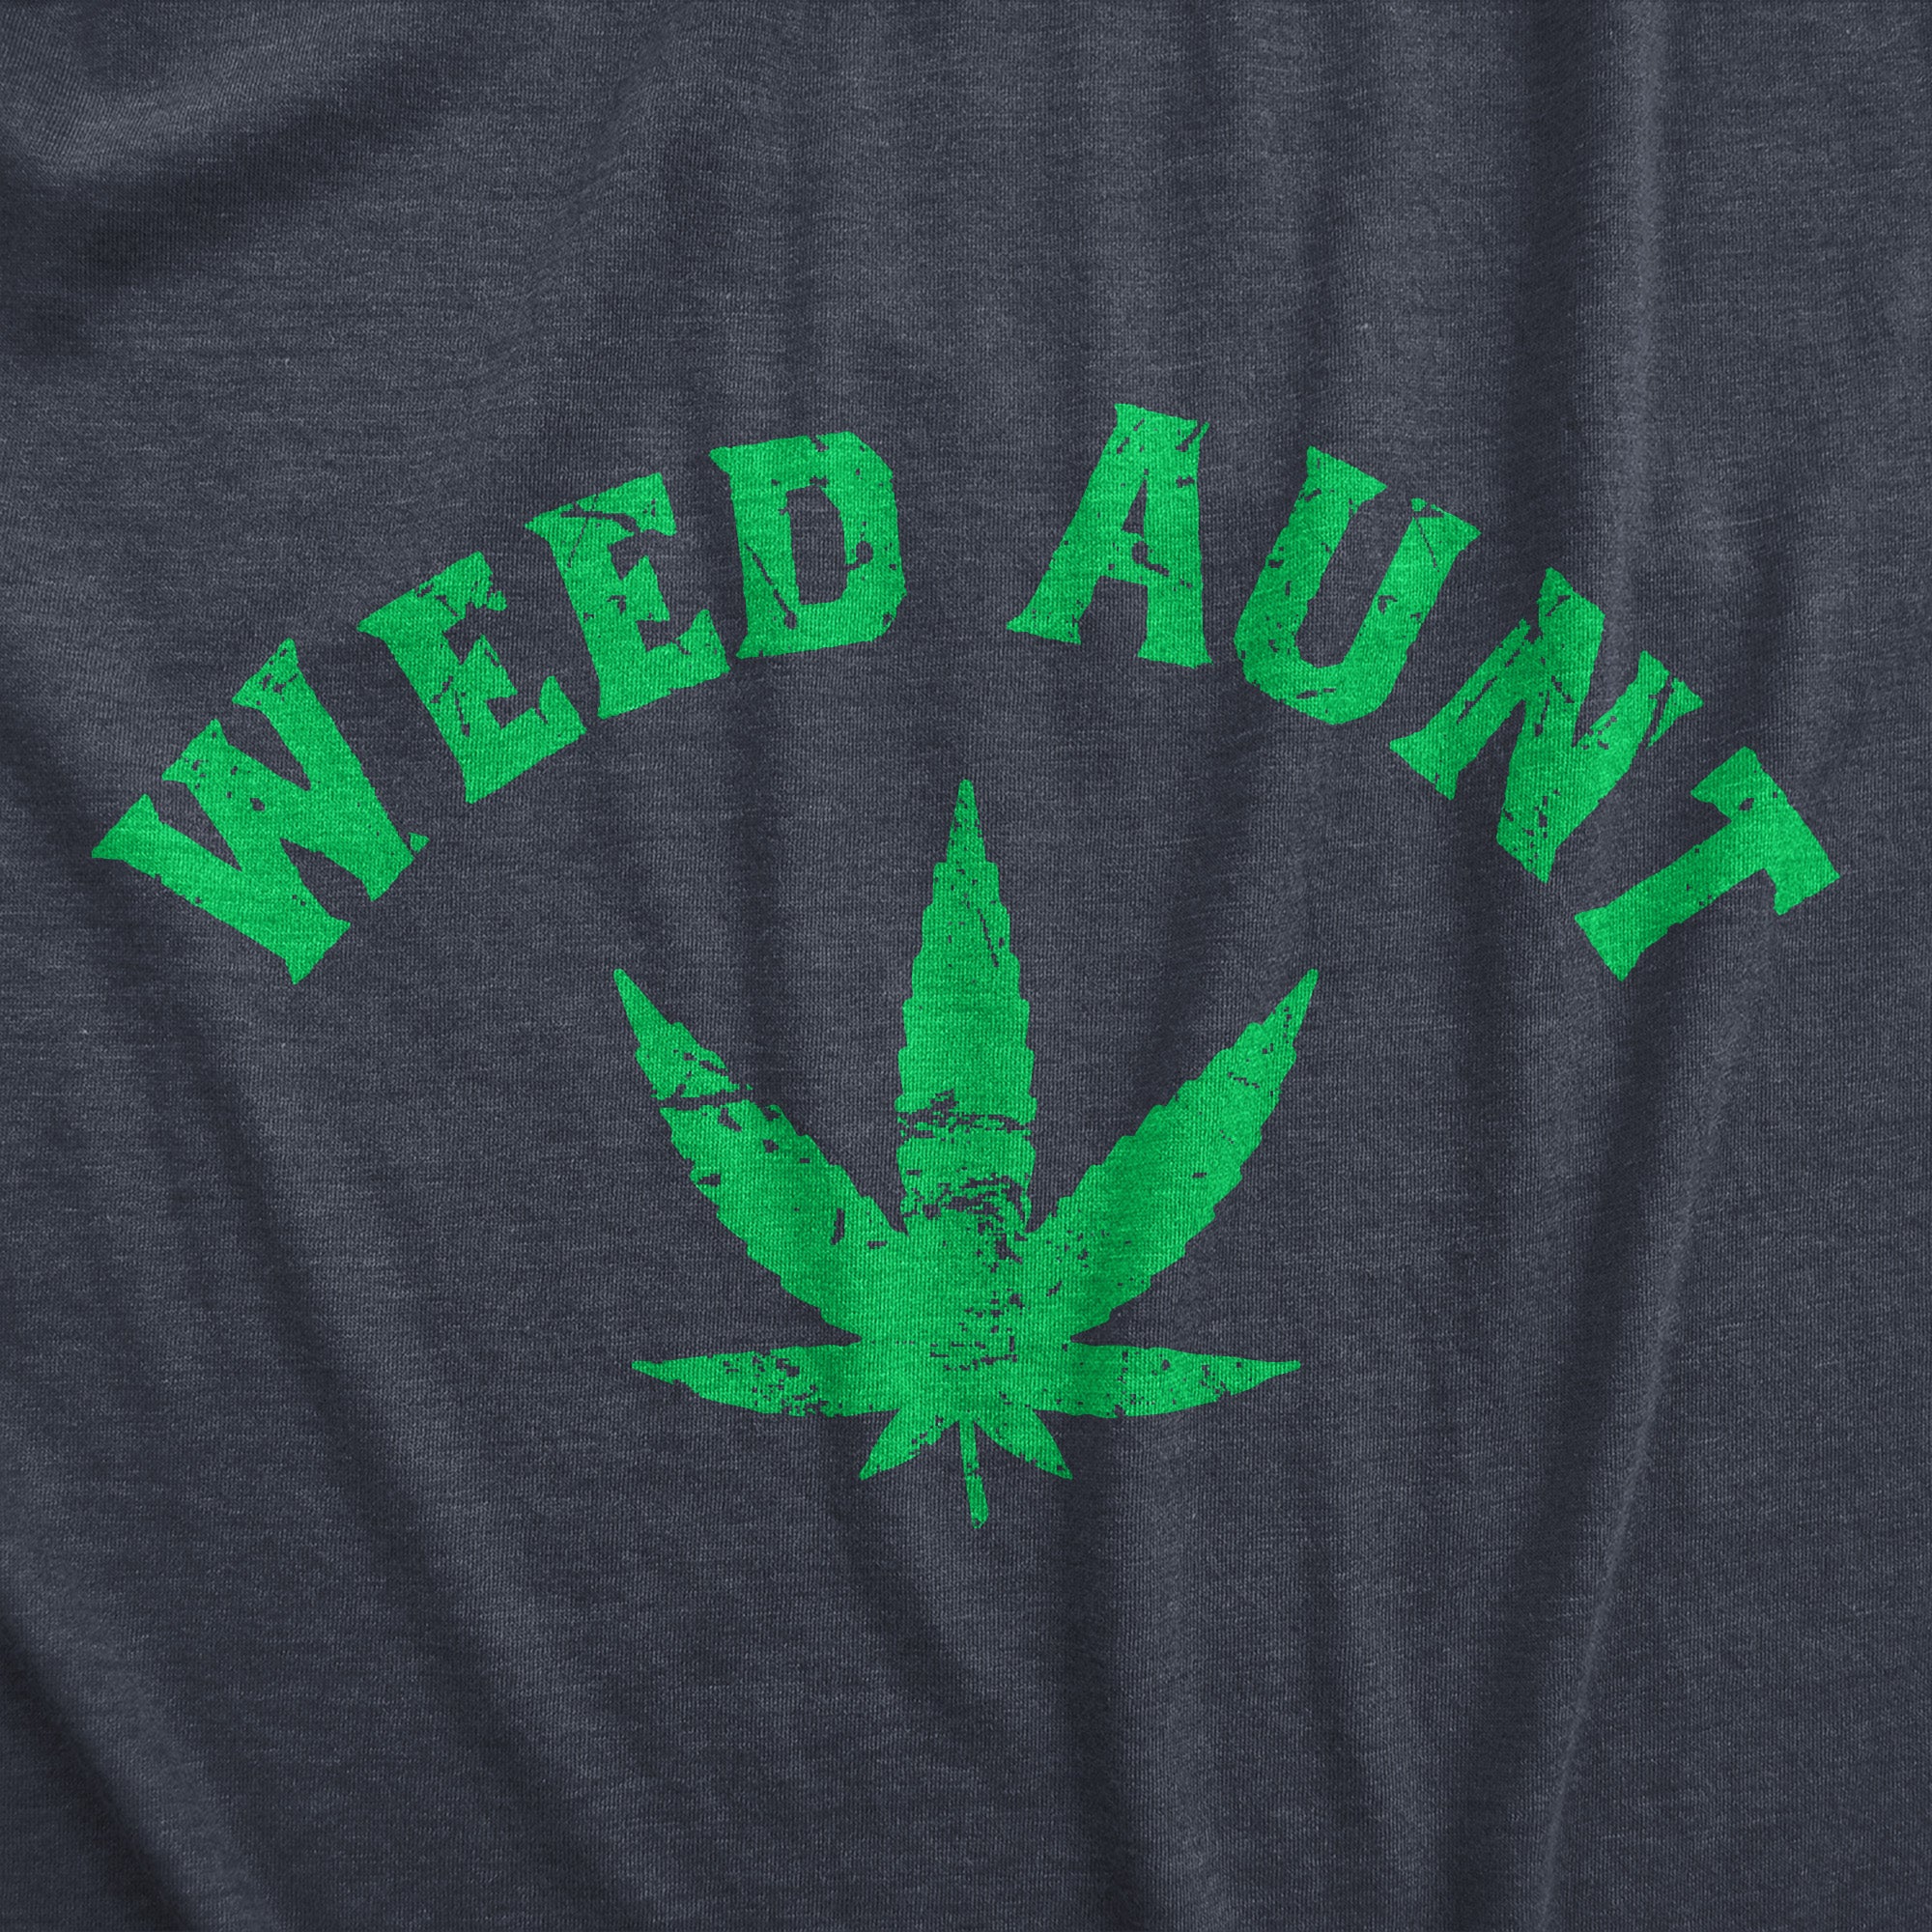 Funny Heather Navy - Weed Aunt Weed Aunt Womens T Shirt Nerdy 420 Aunt Tee